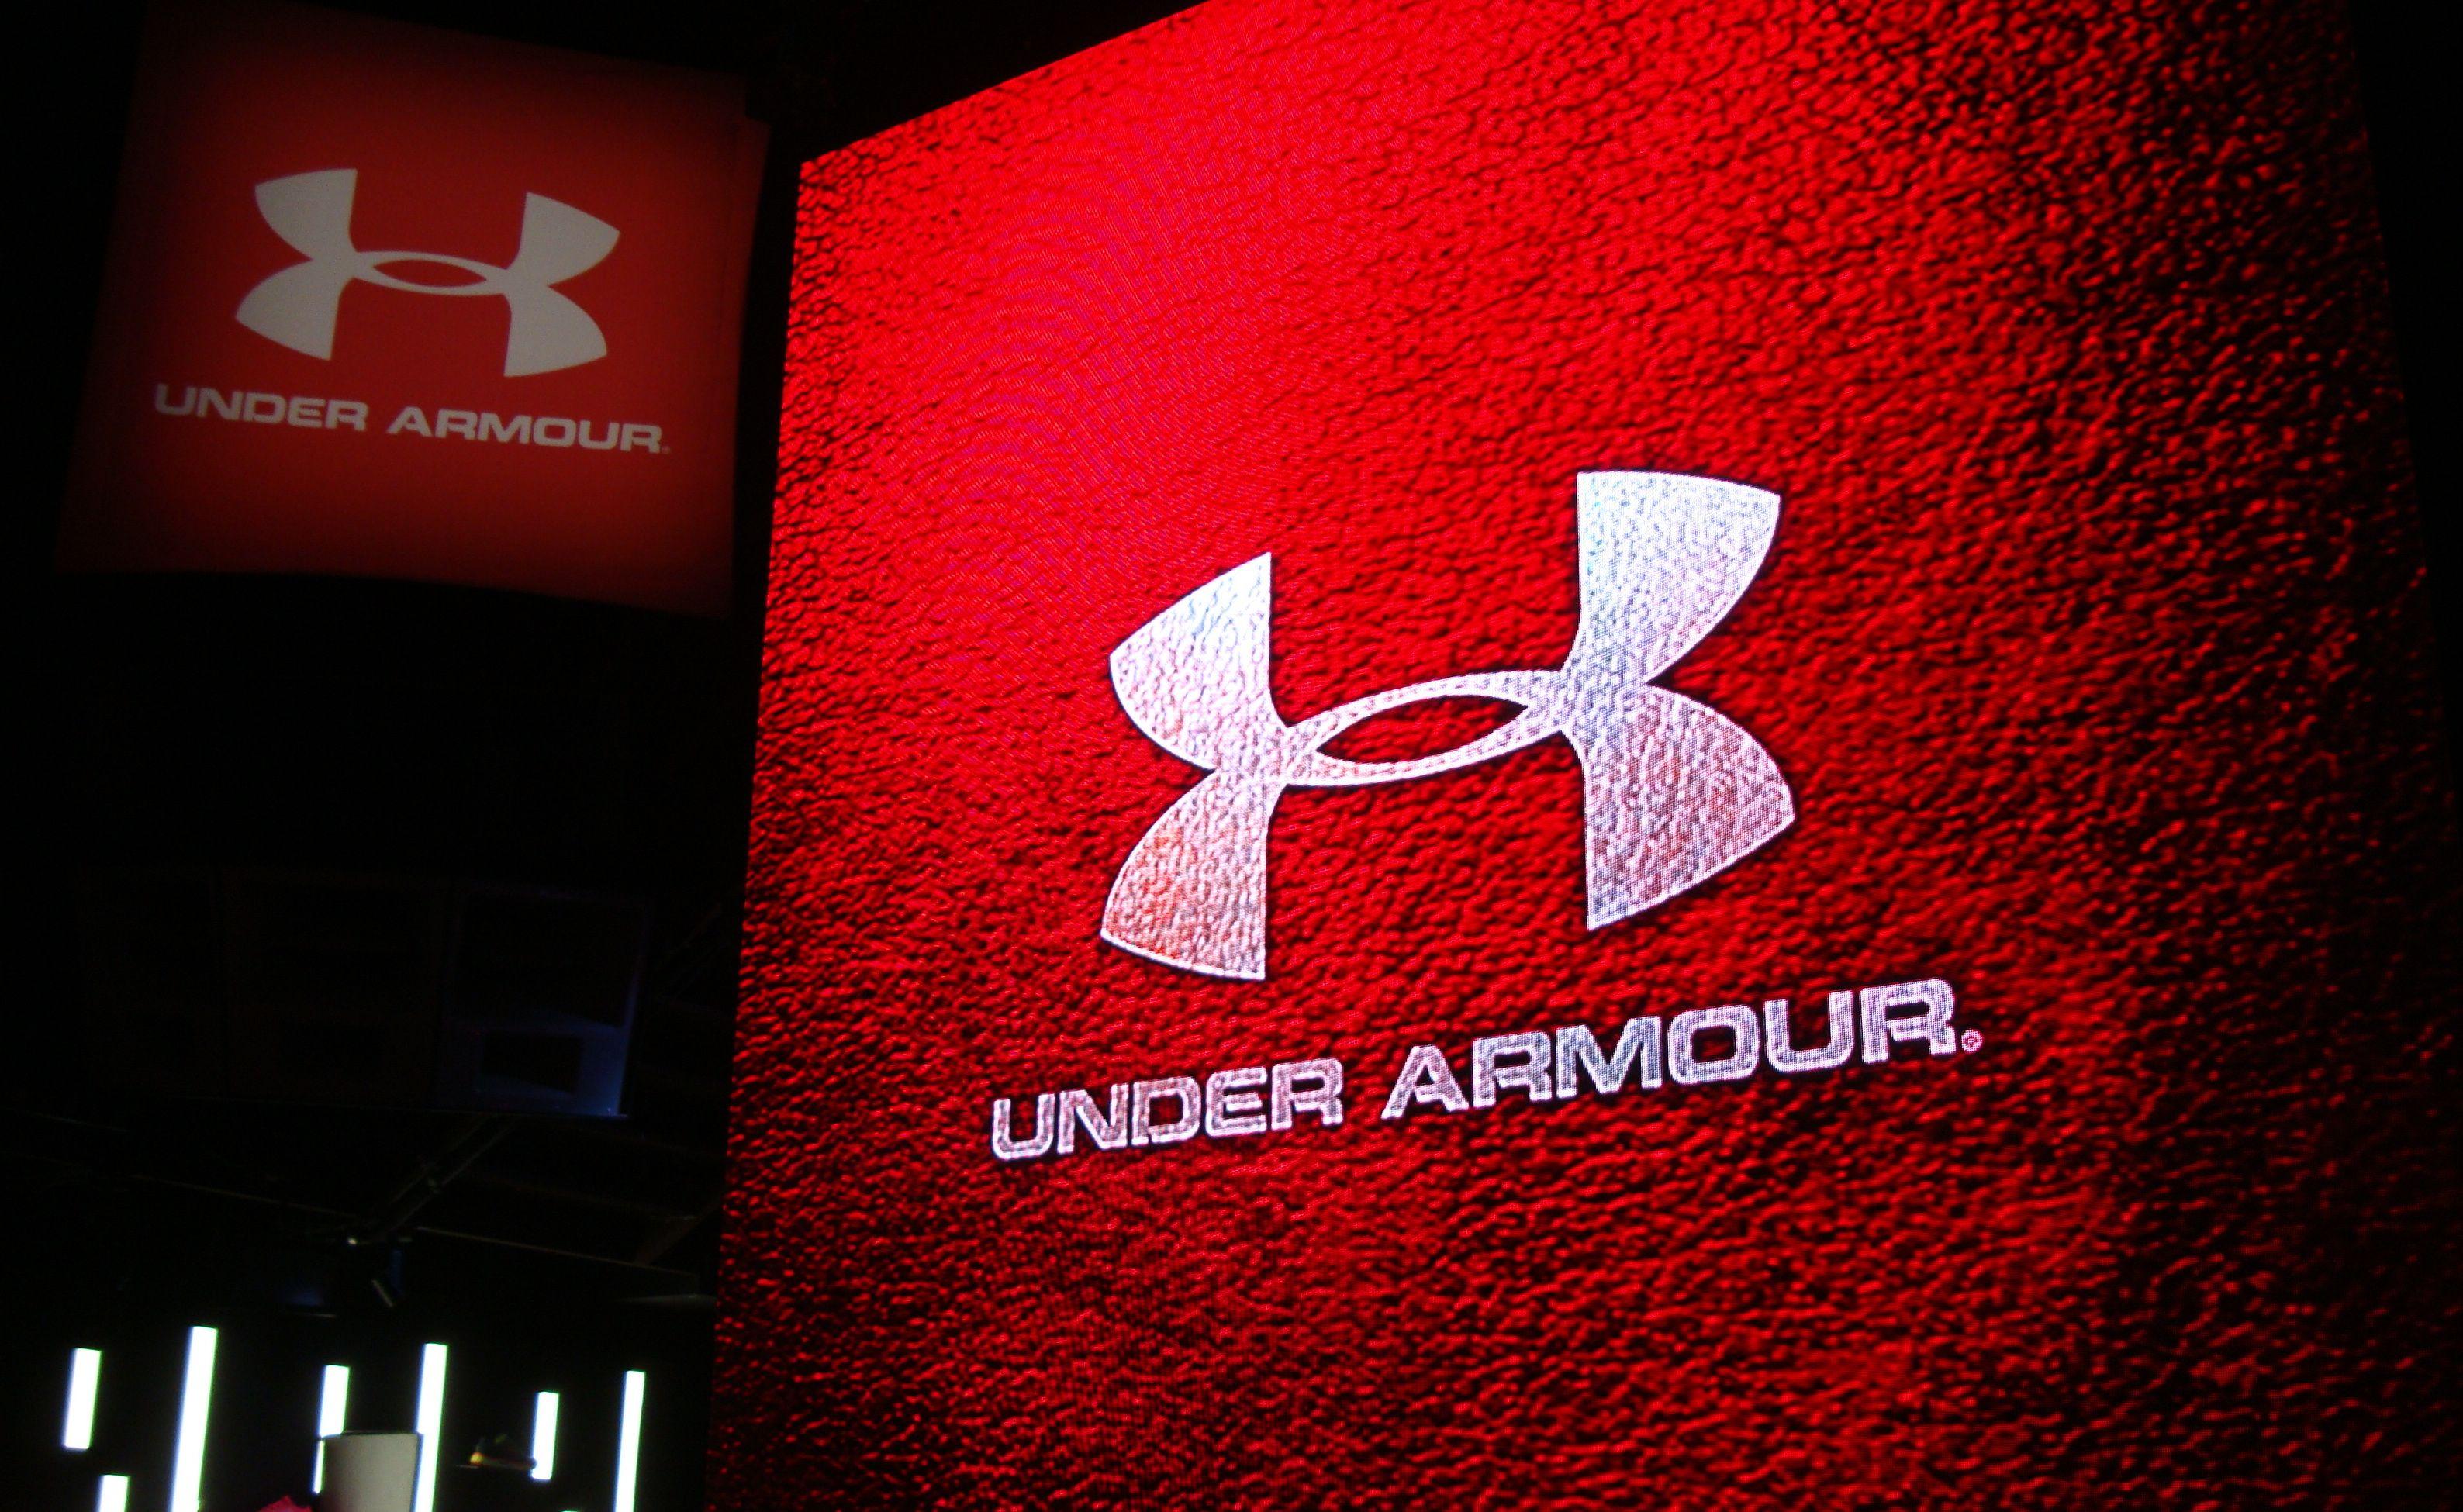 Under Armour stock drops after athletes call out CEO over Trump